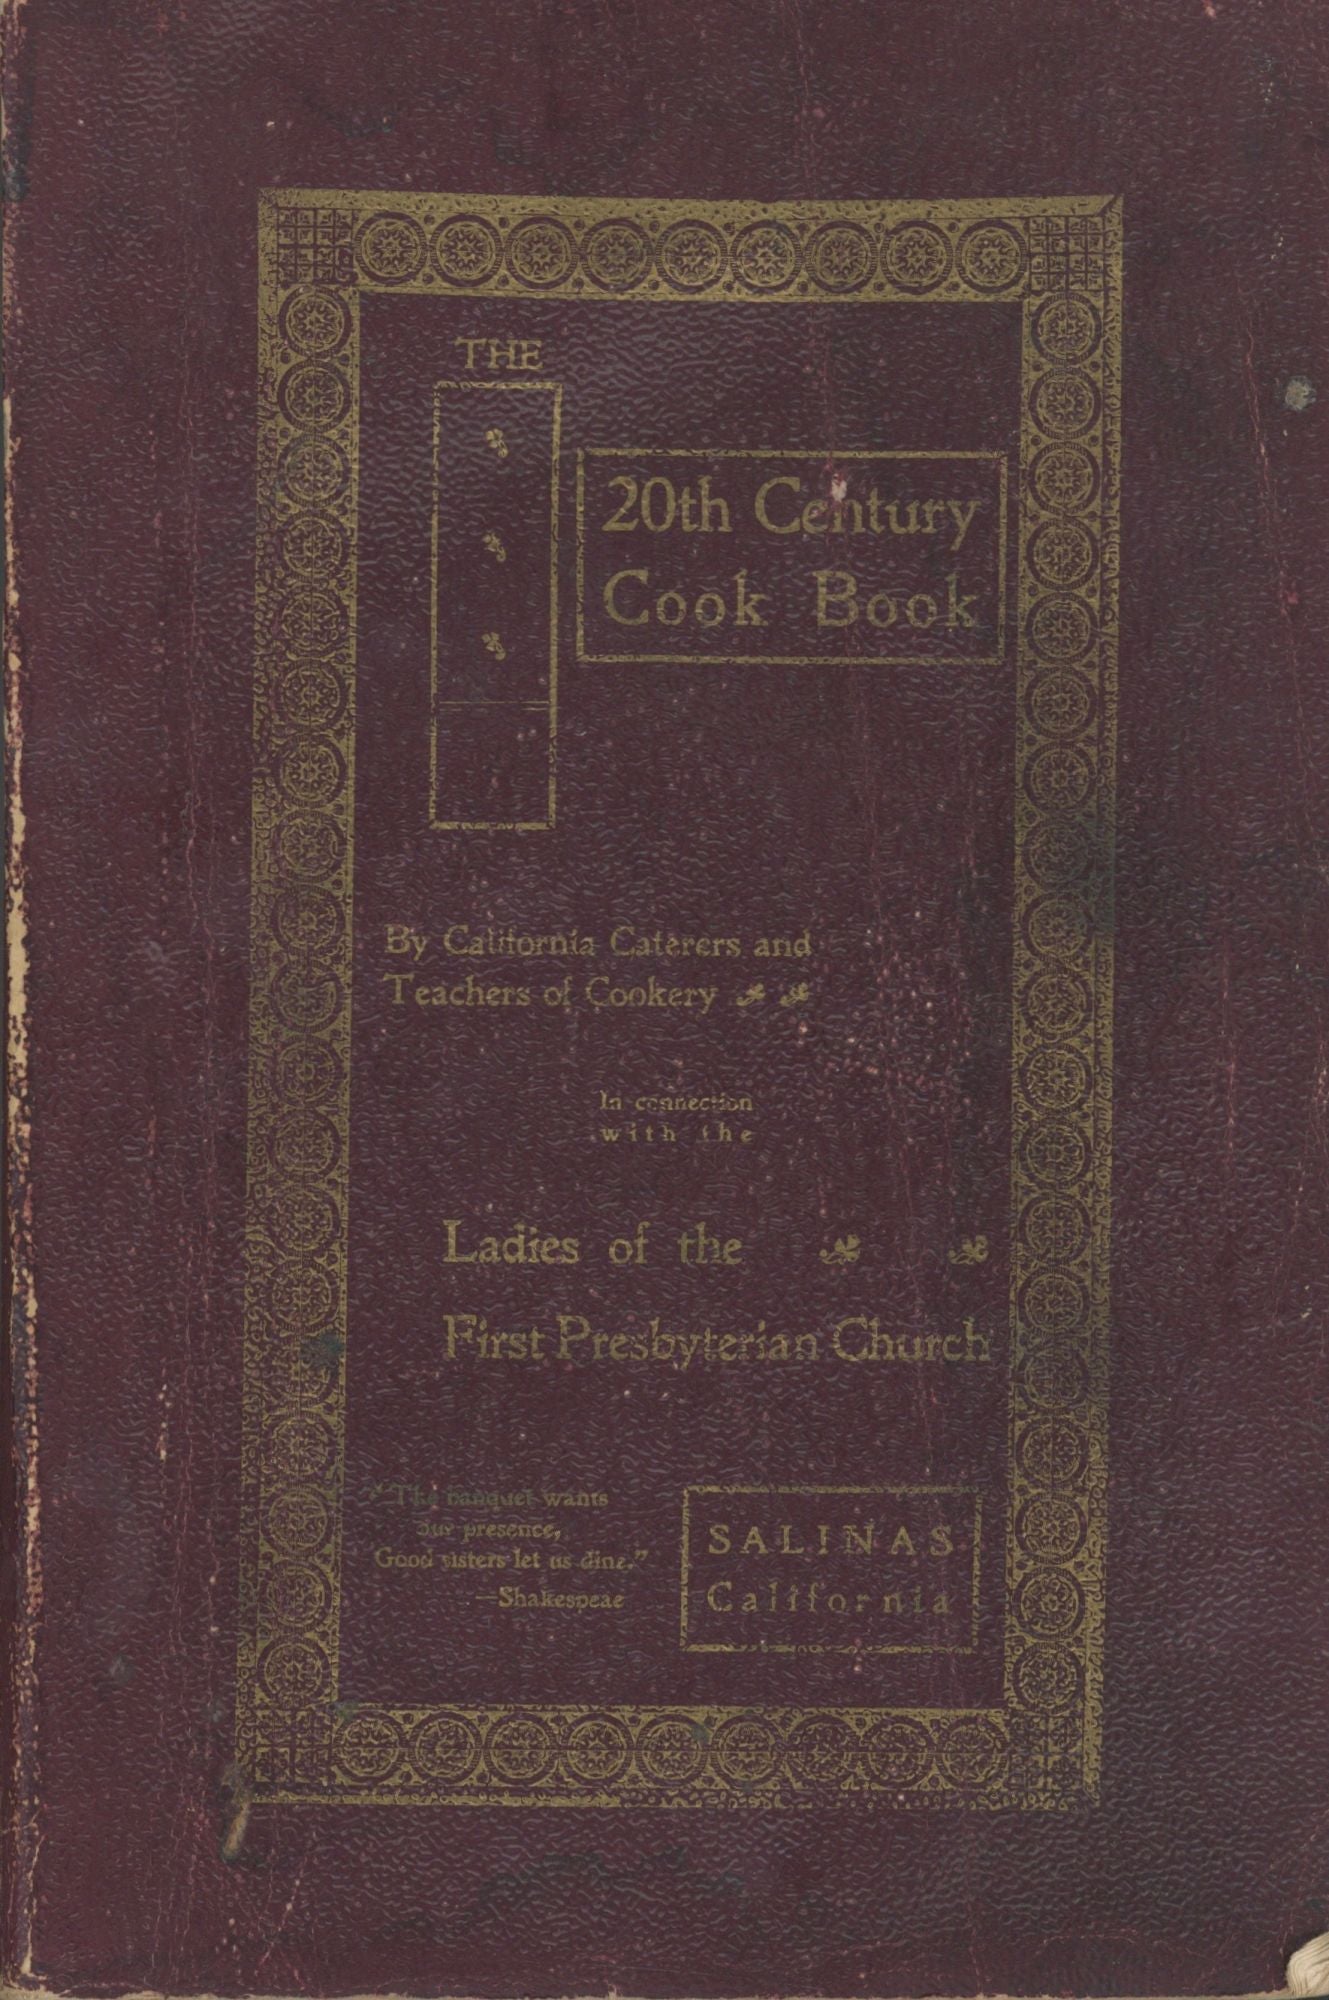 Item #5104 The Twentieth Century Cook Book. By California Caterers and Teachers of Cookery in Connection with the Ladies of the First Presbyterian Church. First Presbyterian Church, Ladies of the Church, Calif Salinas.